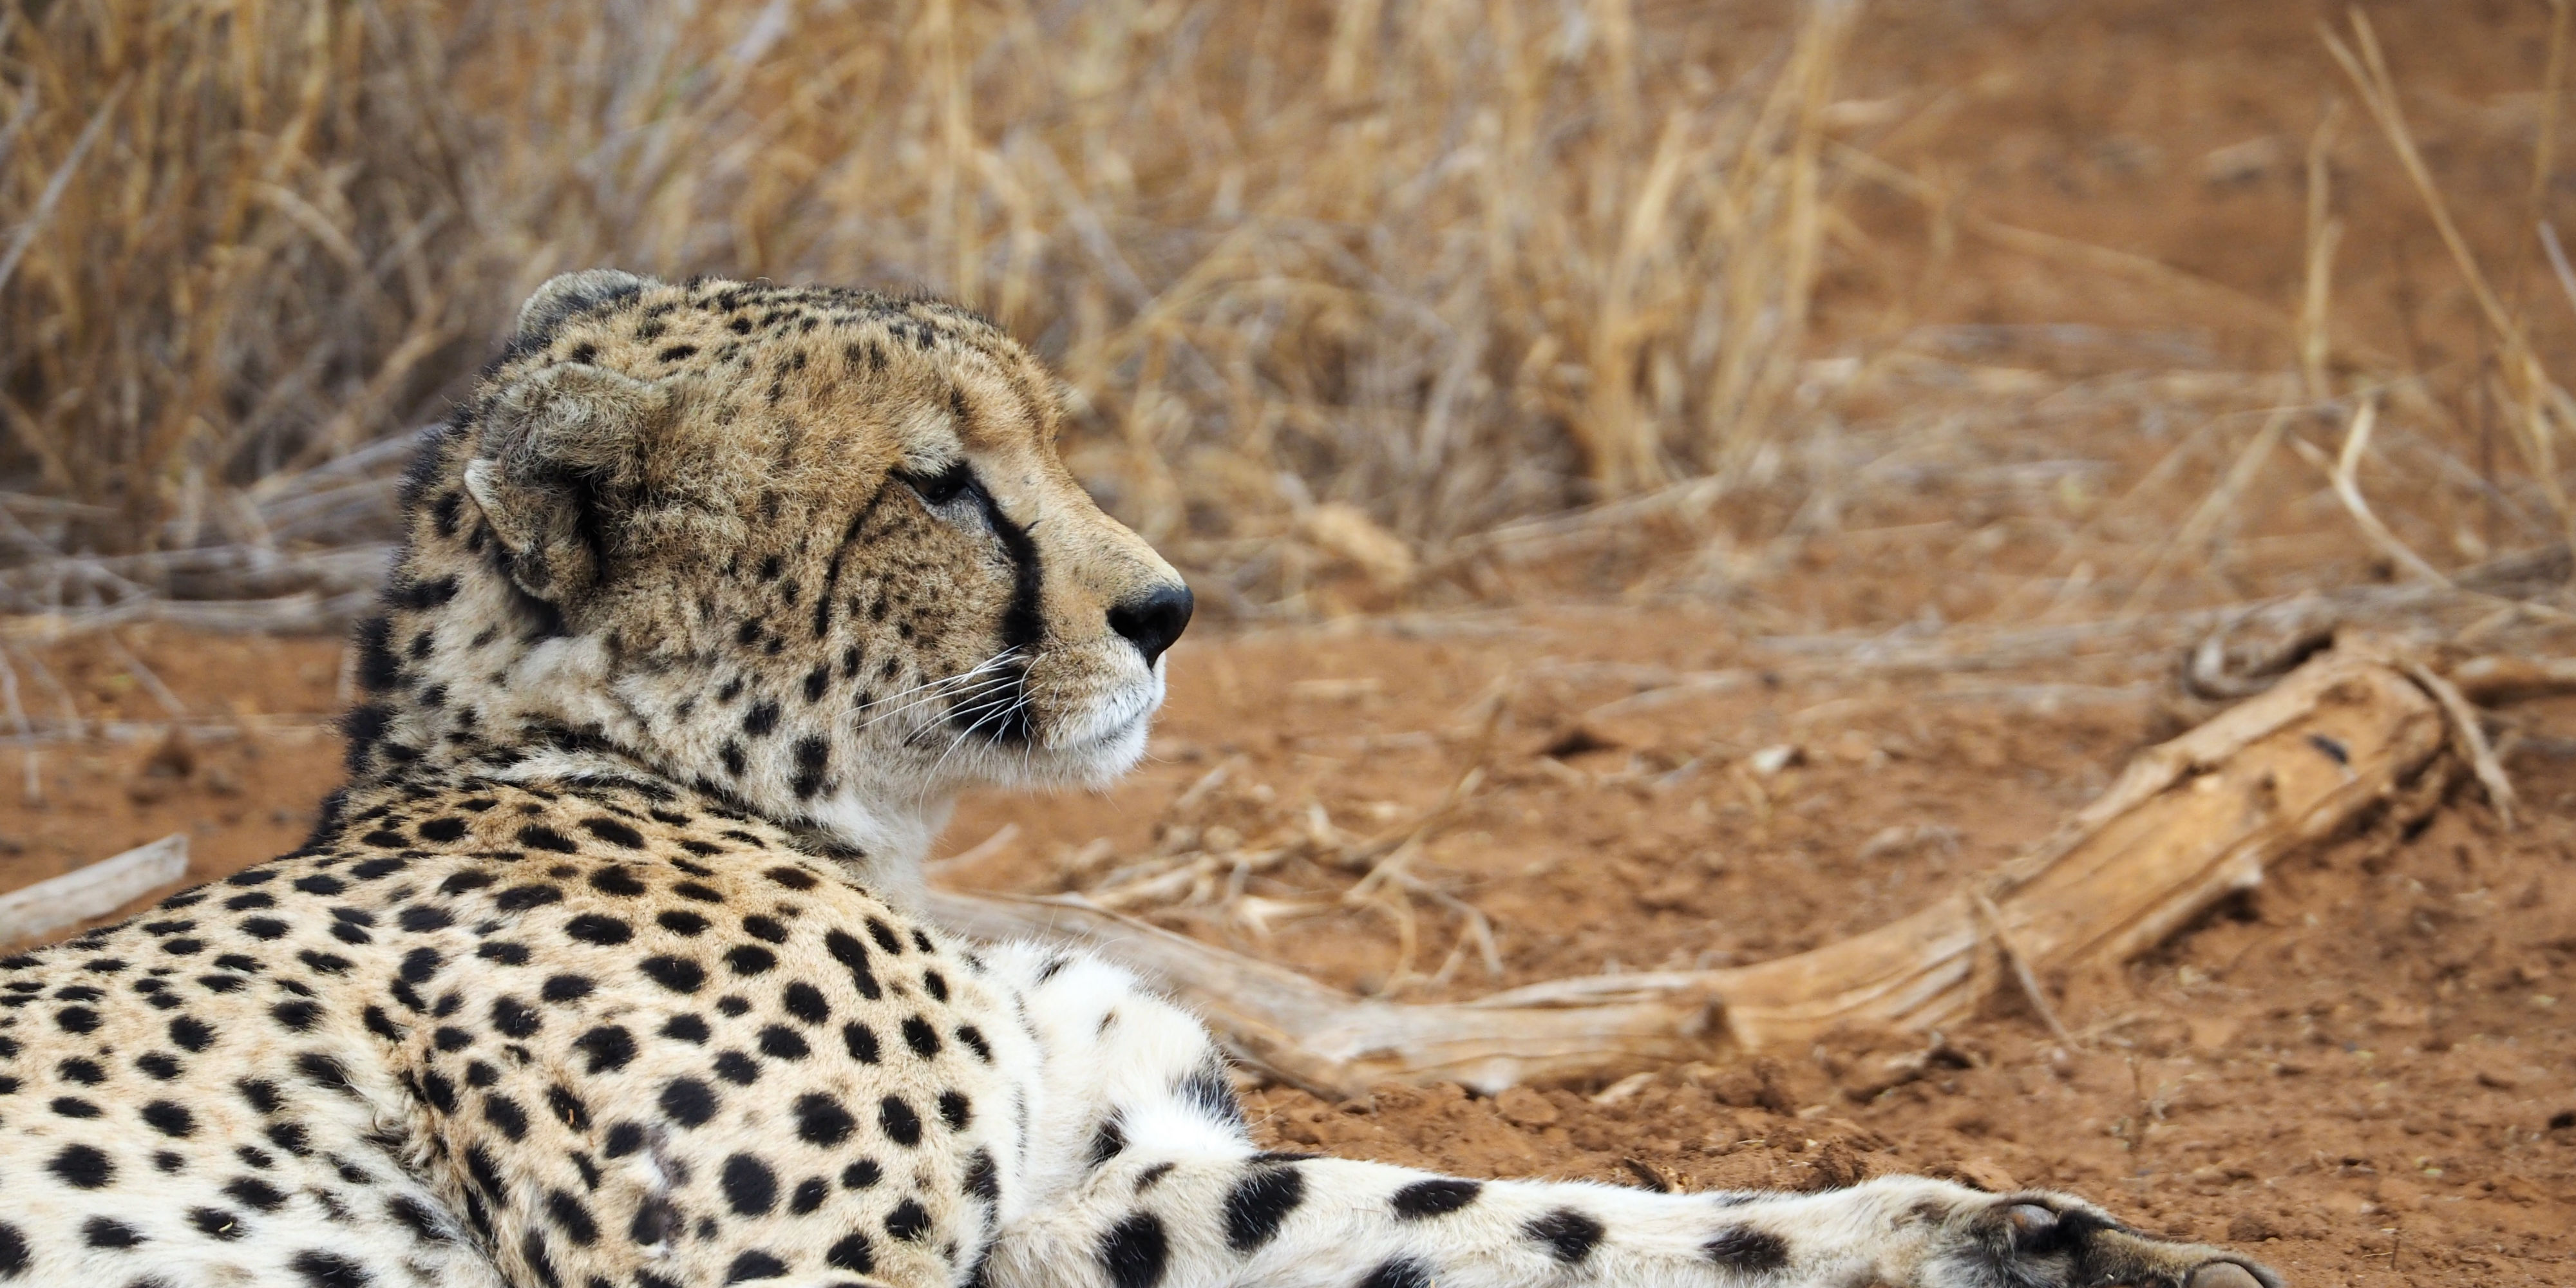 A cheetah lounges on the ground. While volunteering with animals in Africa with animals, GVI participants might be lucky enough to spot on of the reserve's cheetah.